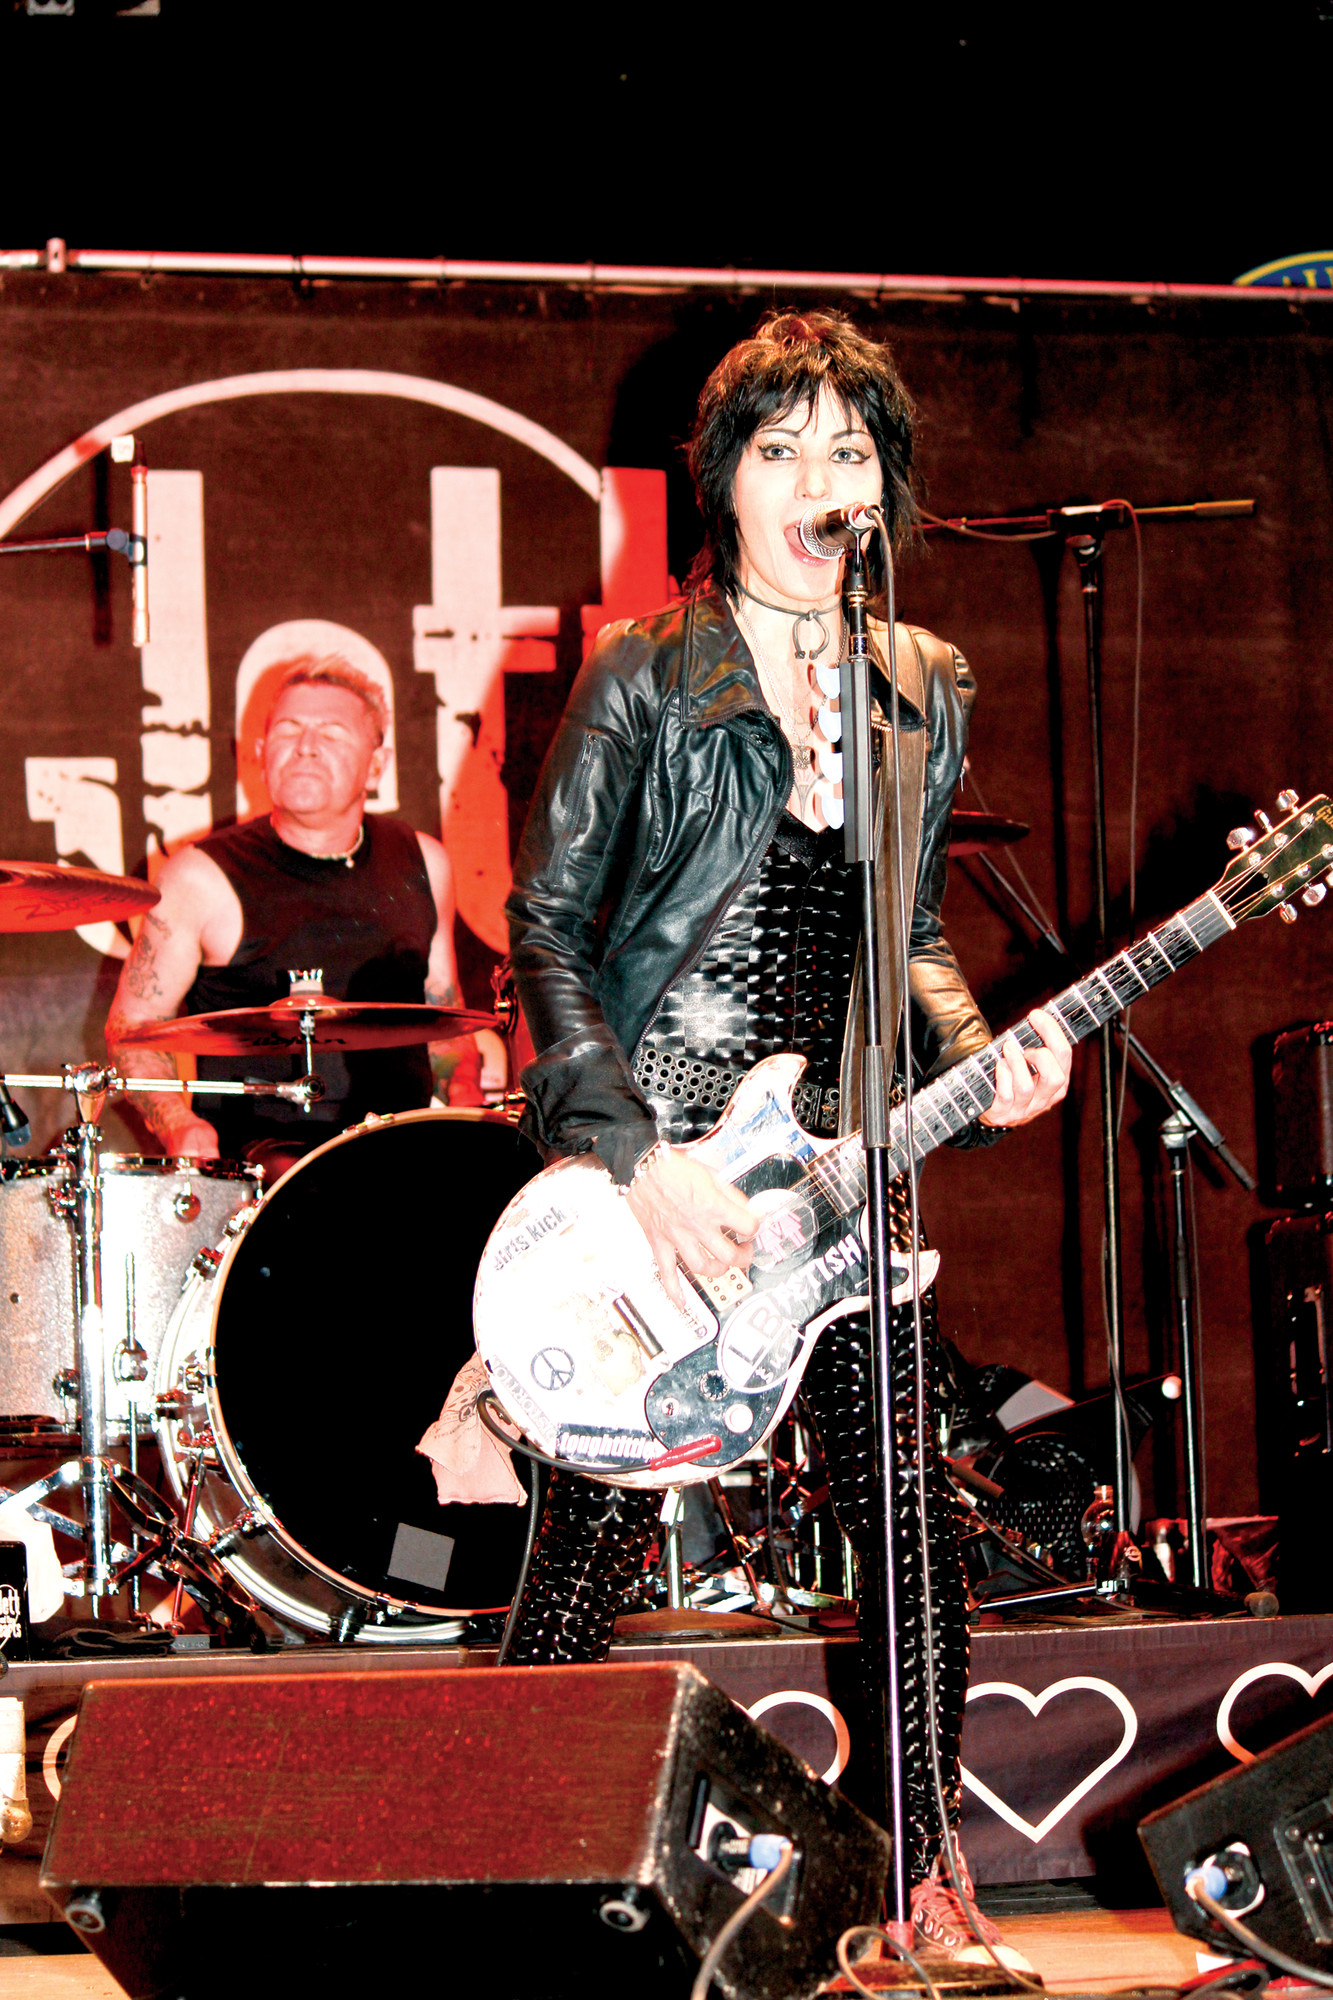 Joan Jett and the Blackhearts electrified the crowd with classic rock ‘n’ roll songs.